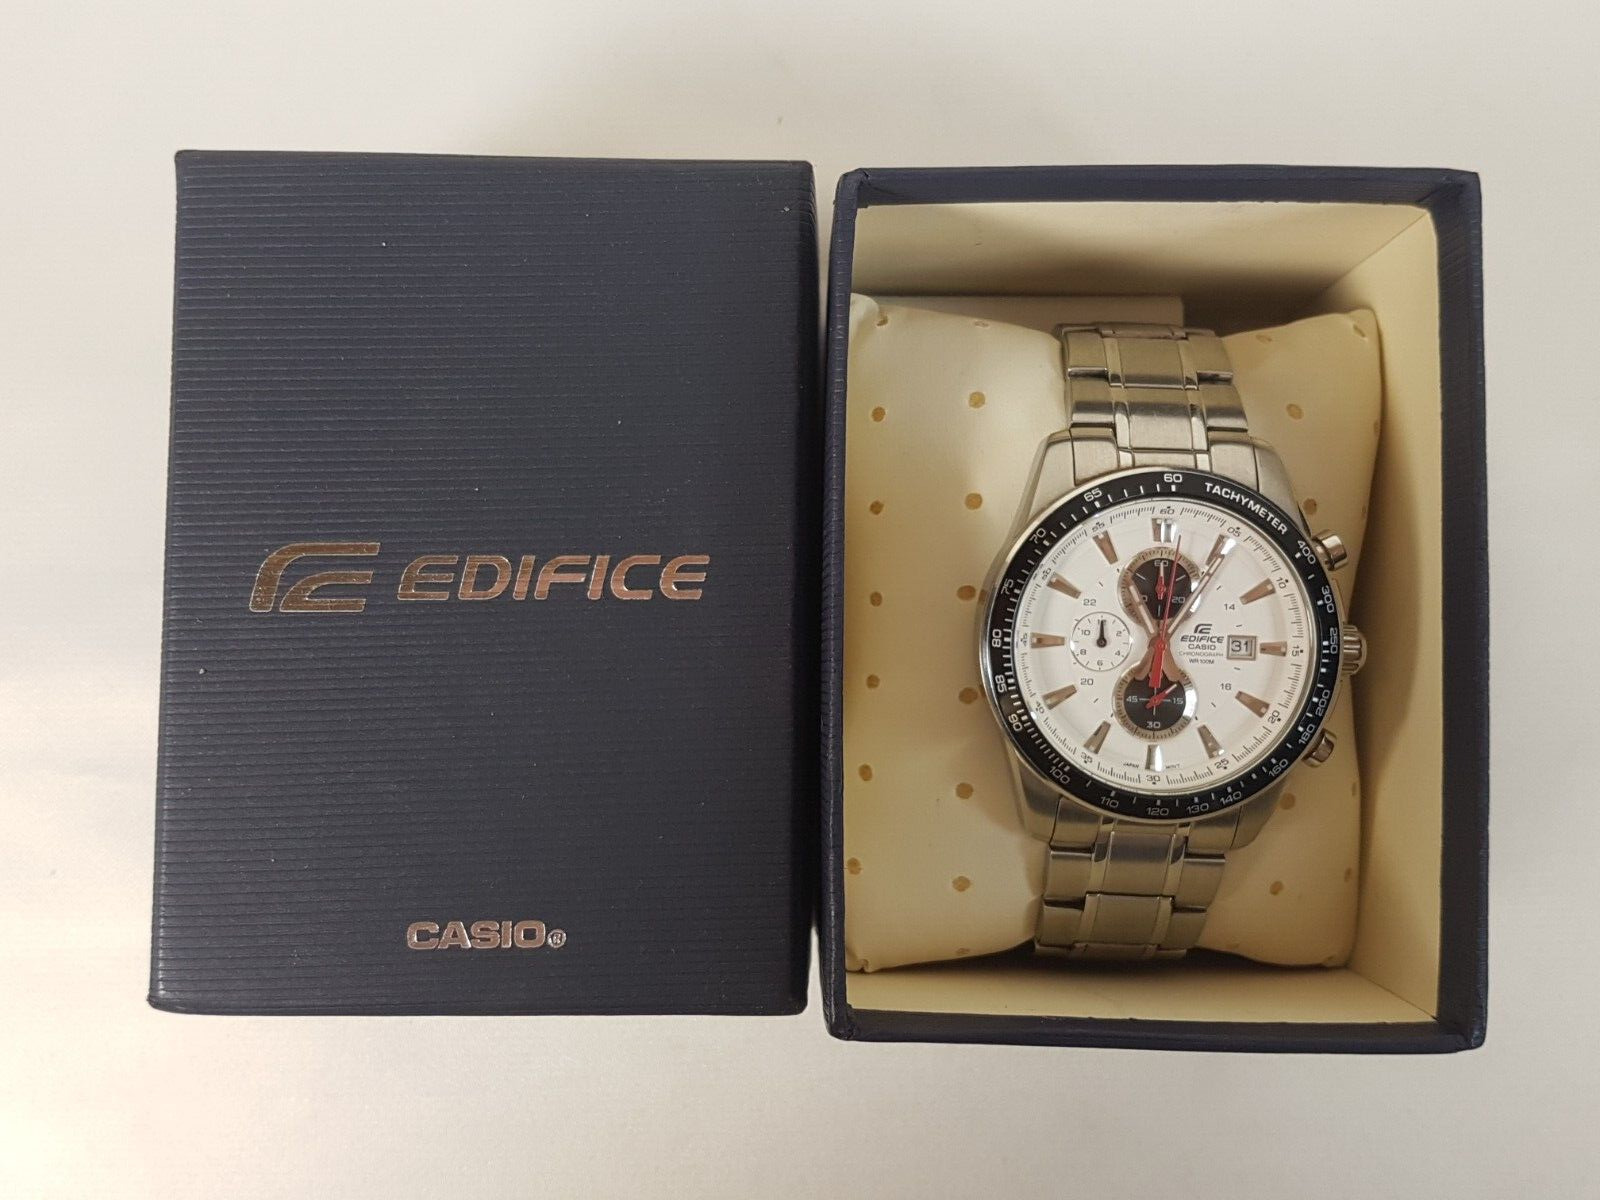 Casio Edifice Chronograph Black & White Stainless Steel Watch